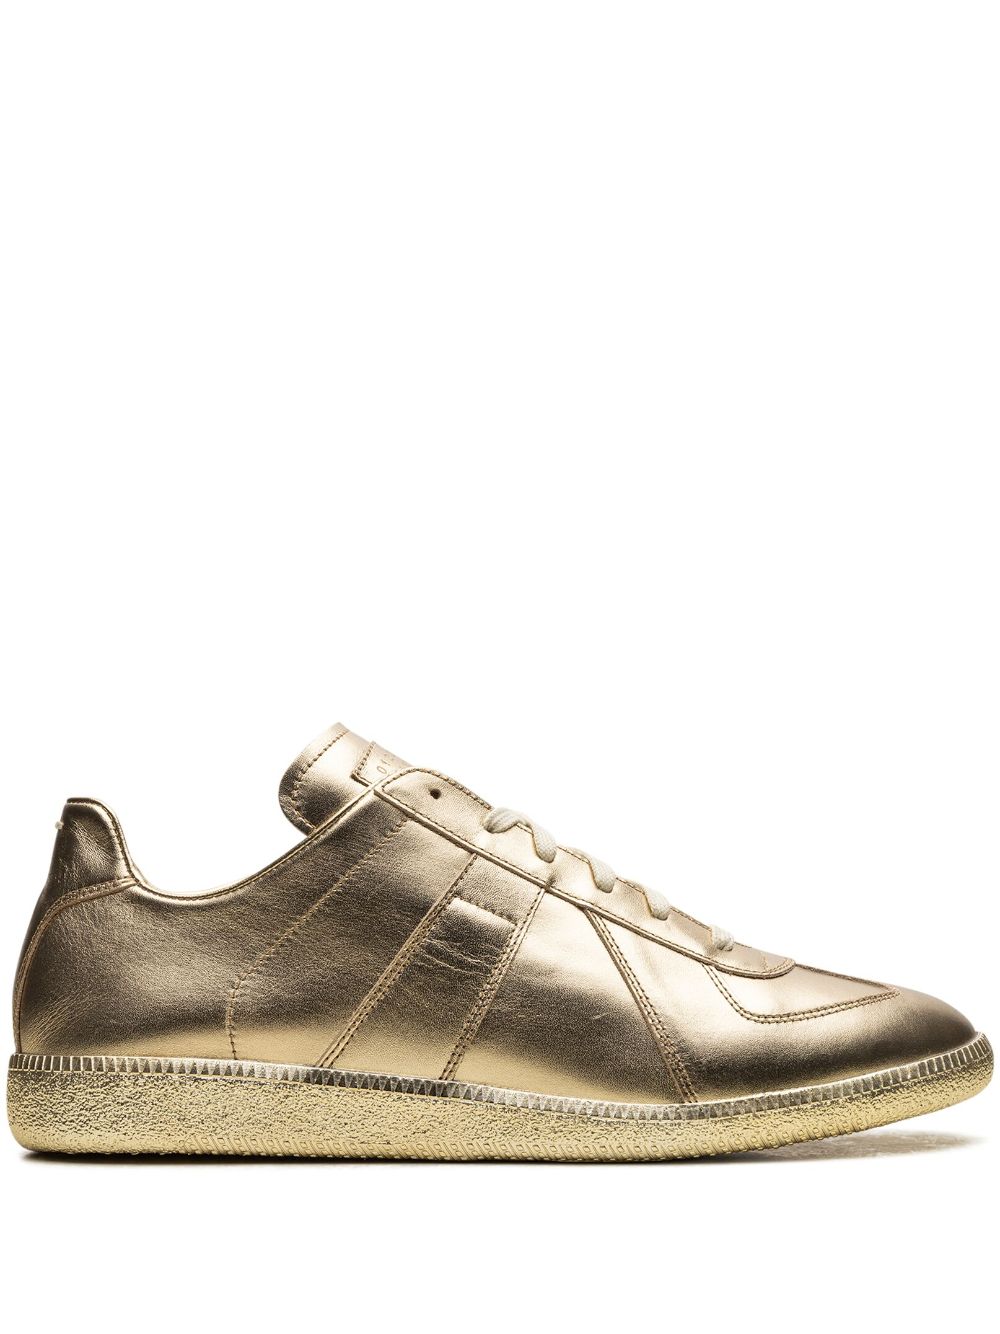 Maison Margiela Replica Low Top Sneaker "gold Plated"